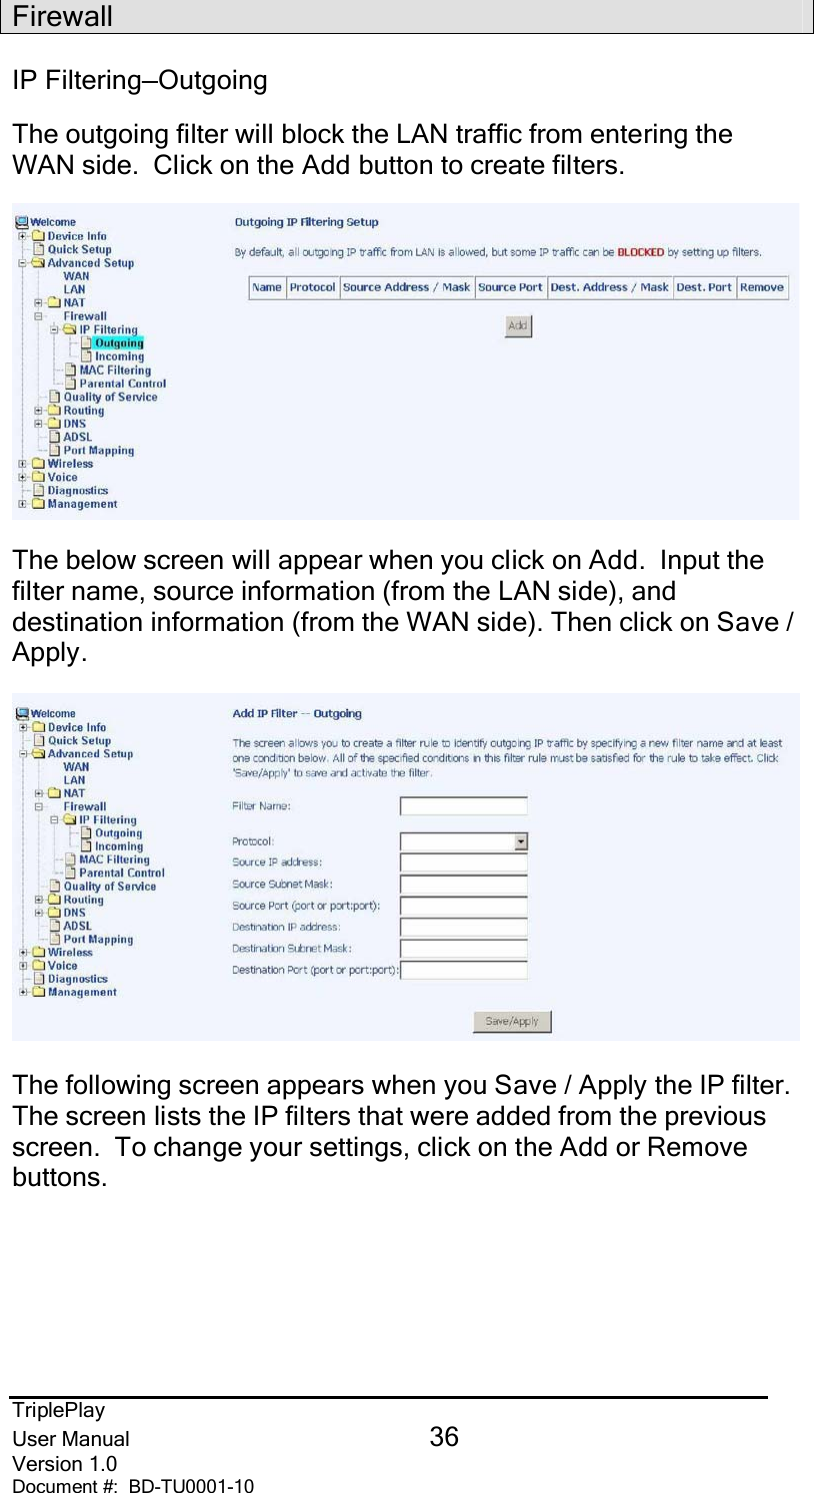 TriplePlayUser Manual 36Version 1.0Document #:  BD-TU0001-10FirewallIP Filtering—OutgoingThe outgoing filter will block the LAN traffic from entering theWAN side.  Click on the Add button to create filters.The below screen will appear when you click on Add.  Input thefilter name, source information (from the LAN side), anddestination information (from the WAN side). Then click on Save /Apply.The following screen appears when you Save / Apply the IP filter.The screen lists the IP filters that were added from the previousscreen.  To change your settings, click on the Add or Removebuttons.